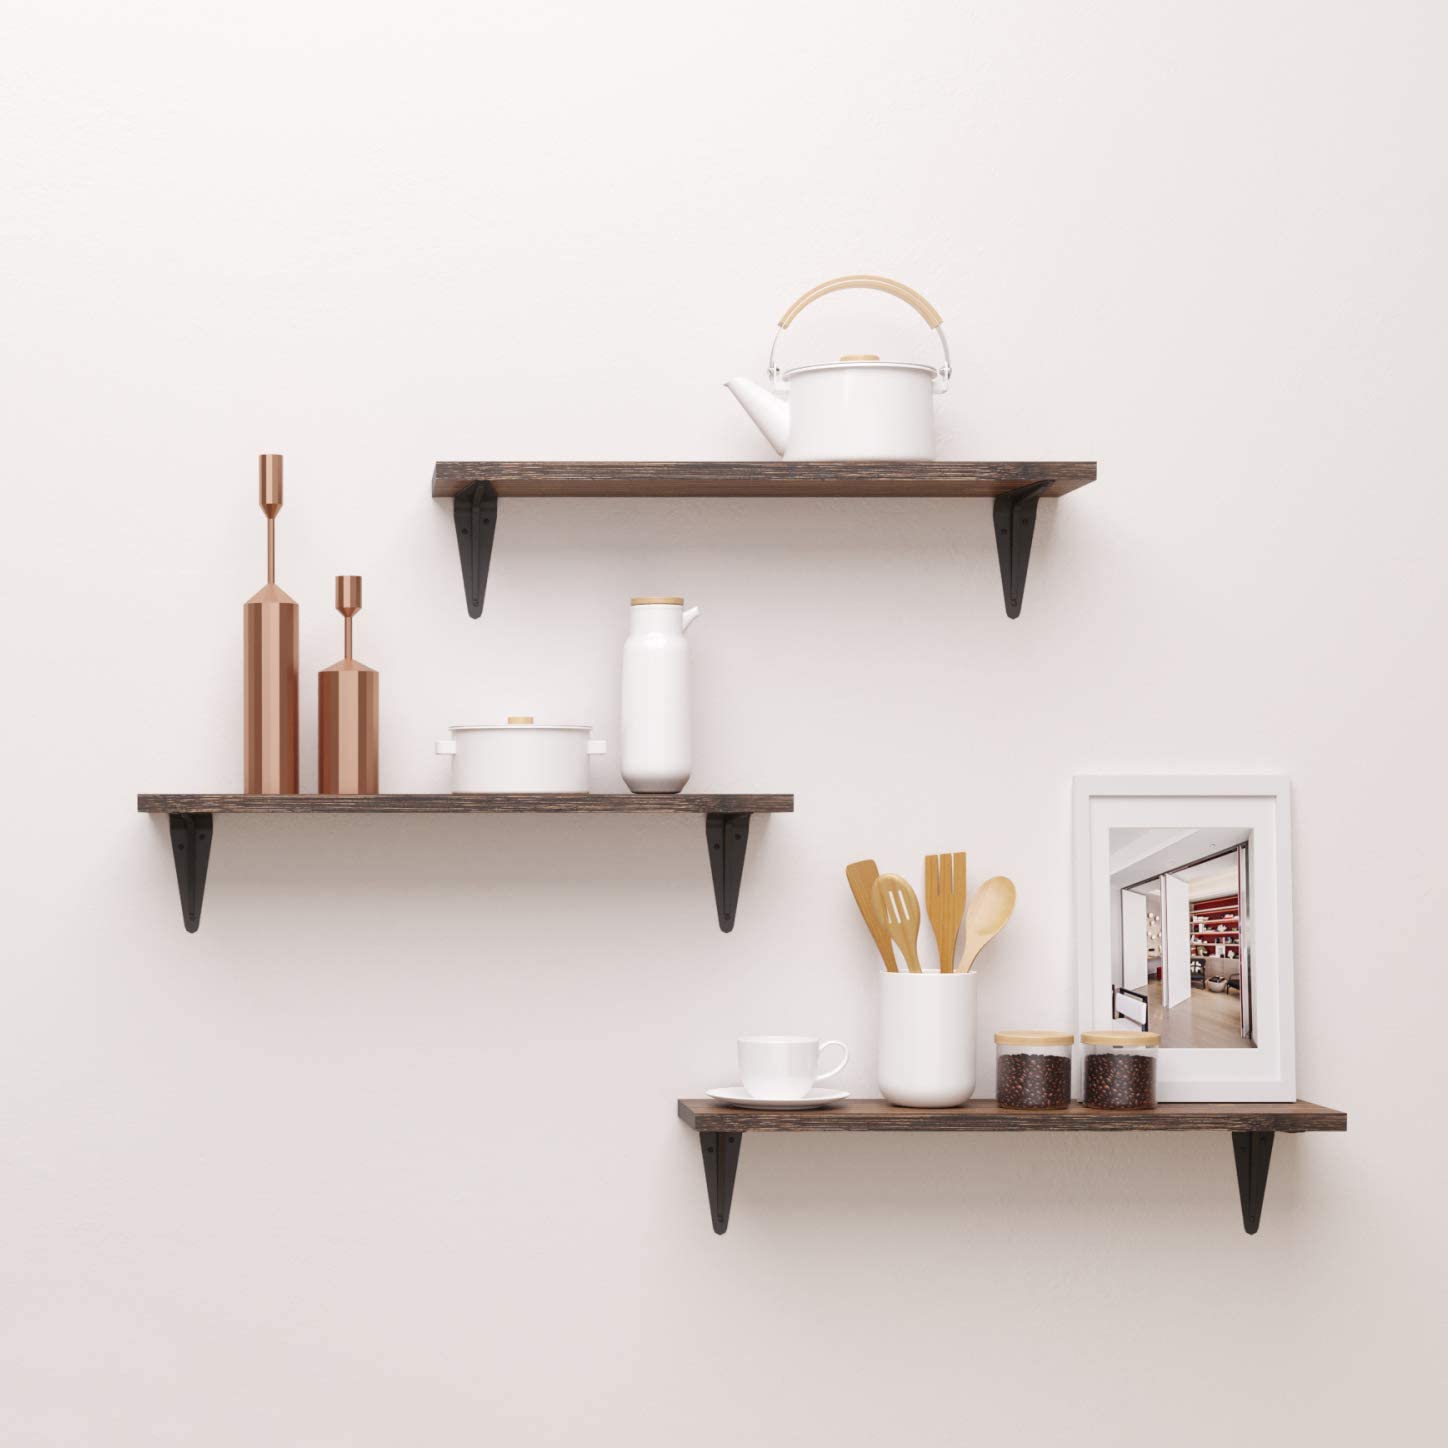 Wall Mounted Shelf Hanging Wall Shelves Details about   Kosiehouse Rustic Wood Floating Shelves 